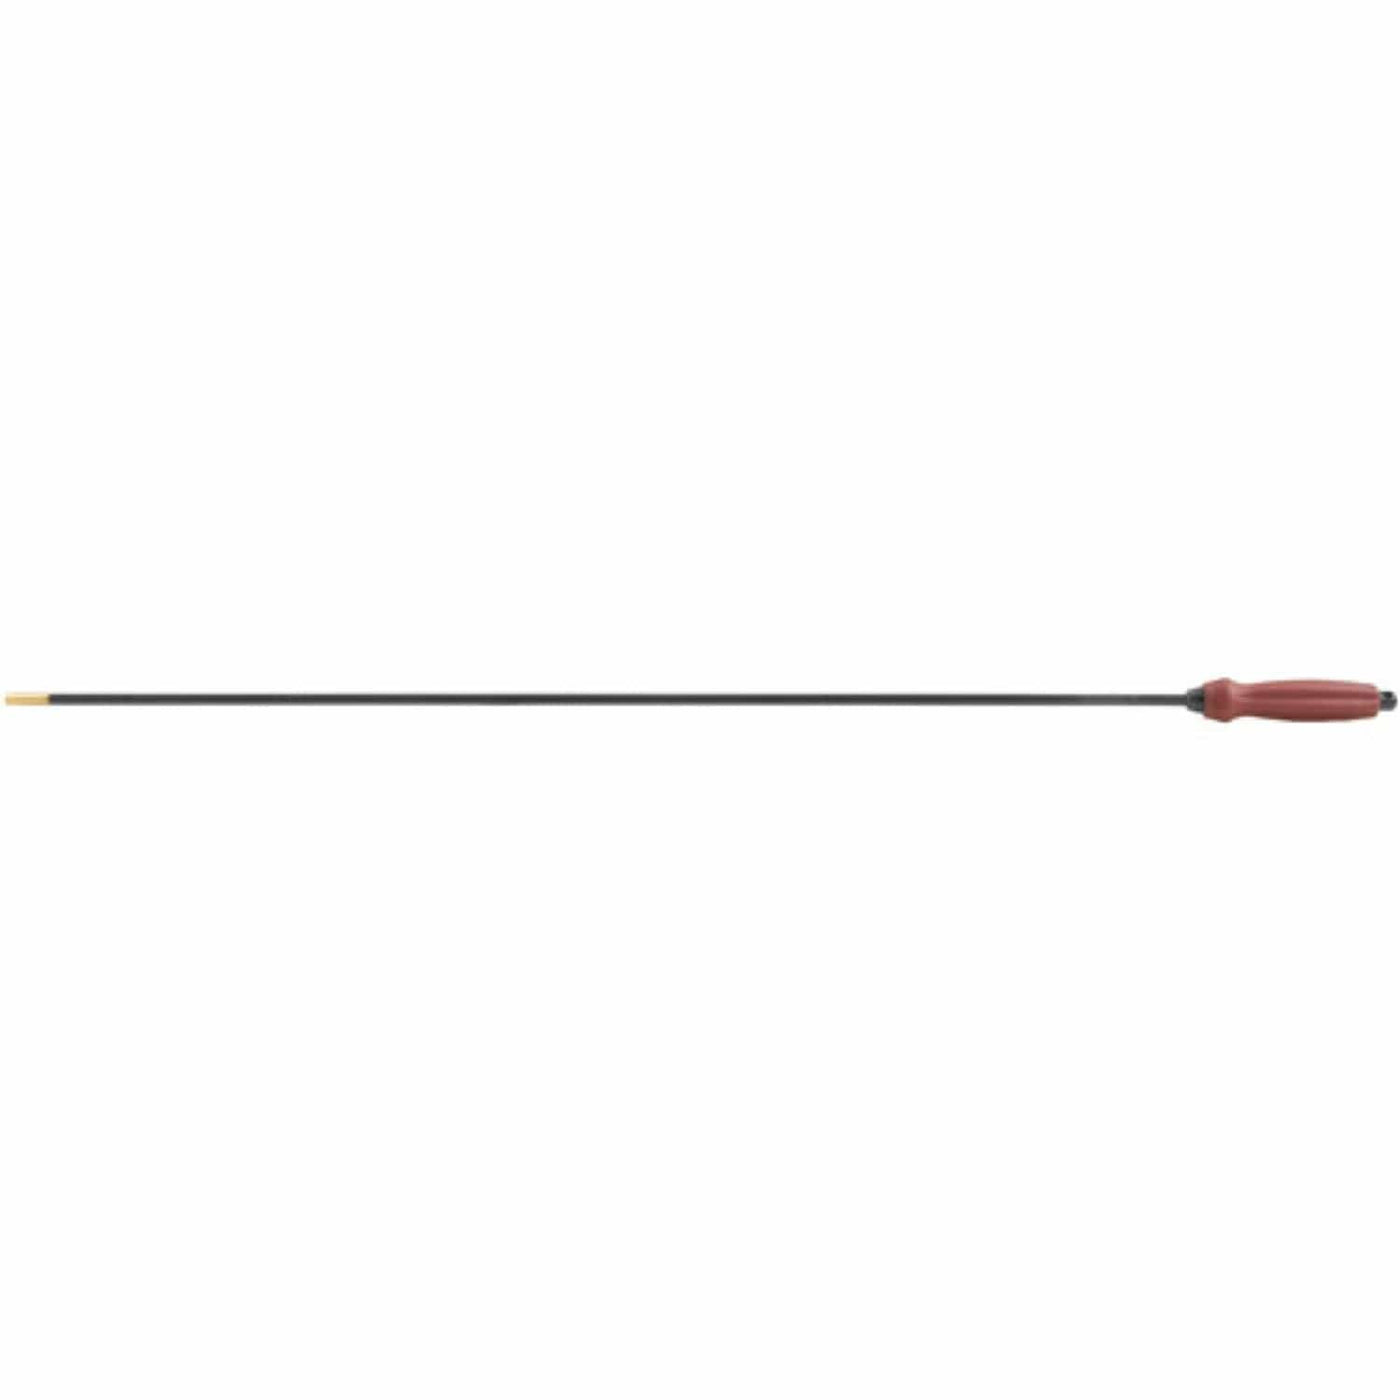 Tipton Tipton Deluxe 1 Pc CF Cleaning Rod 27 to 45 Cal 36 in Shooting